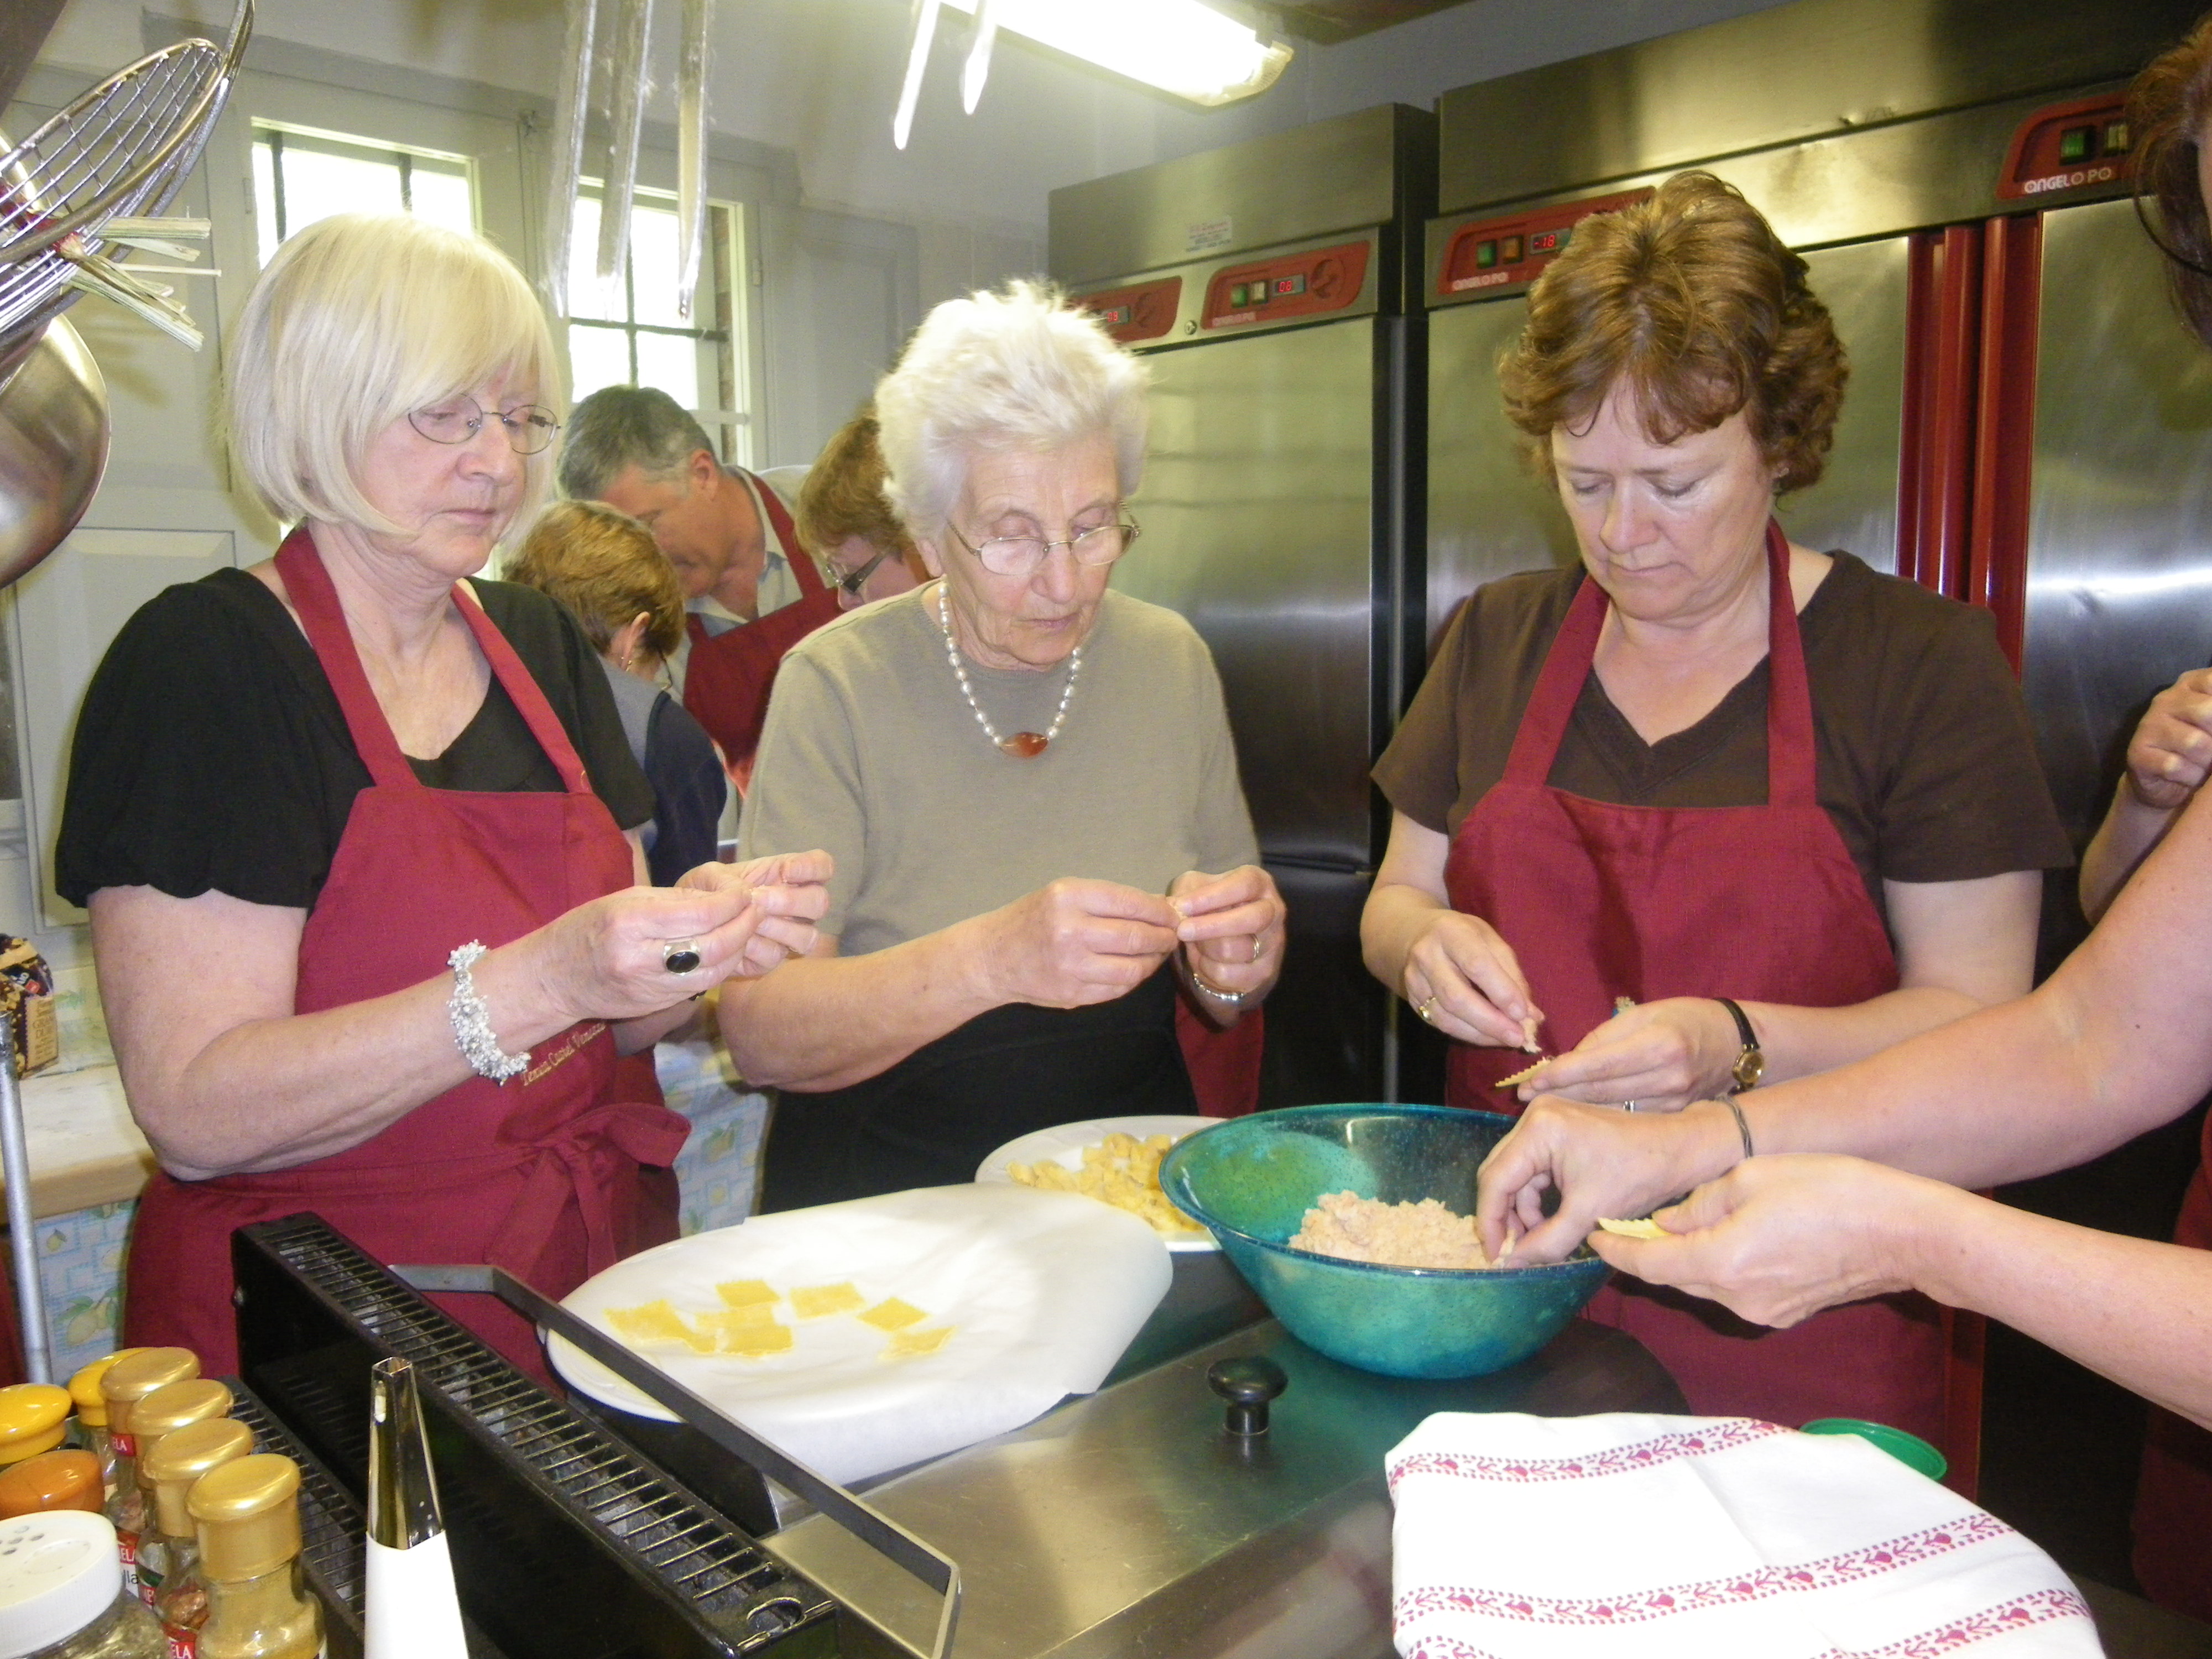 Maria's Cookery Course - Cooking School Venice